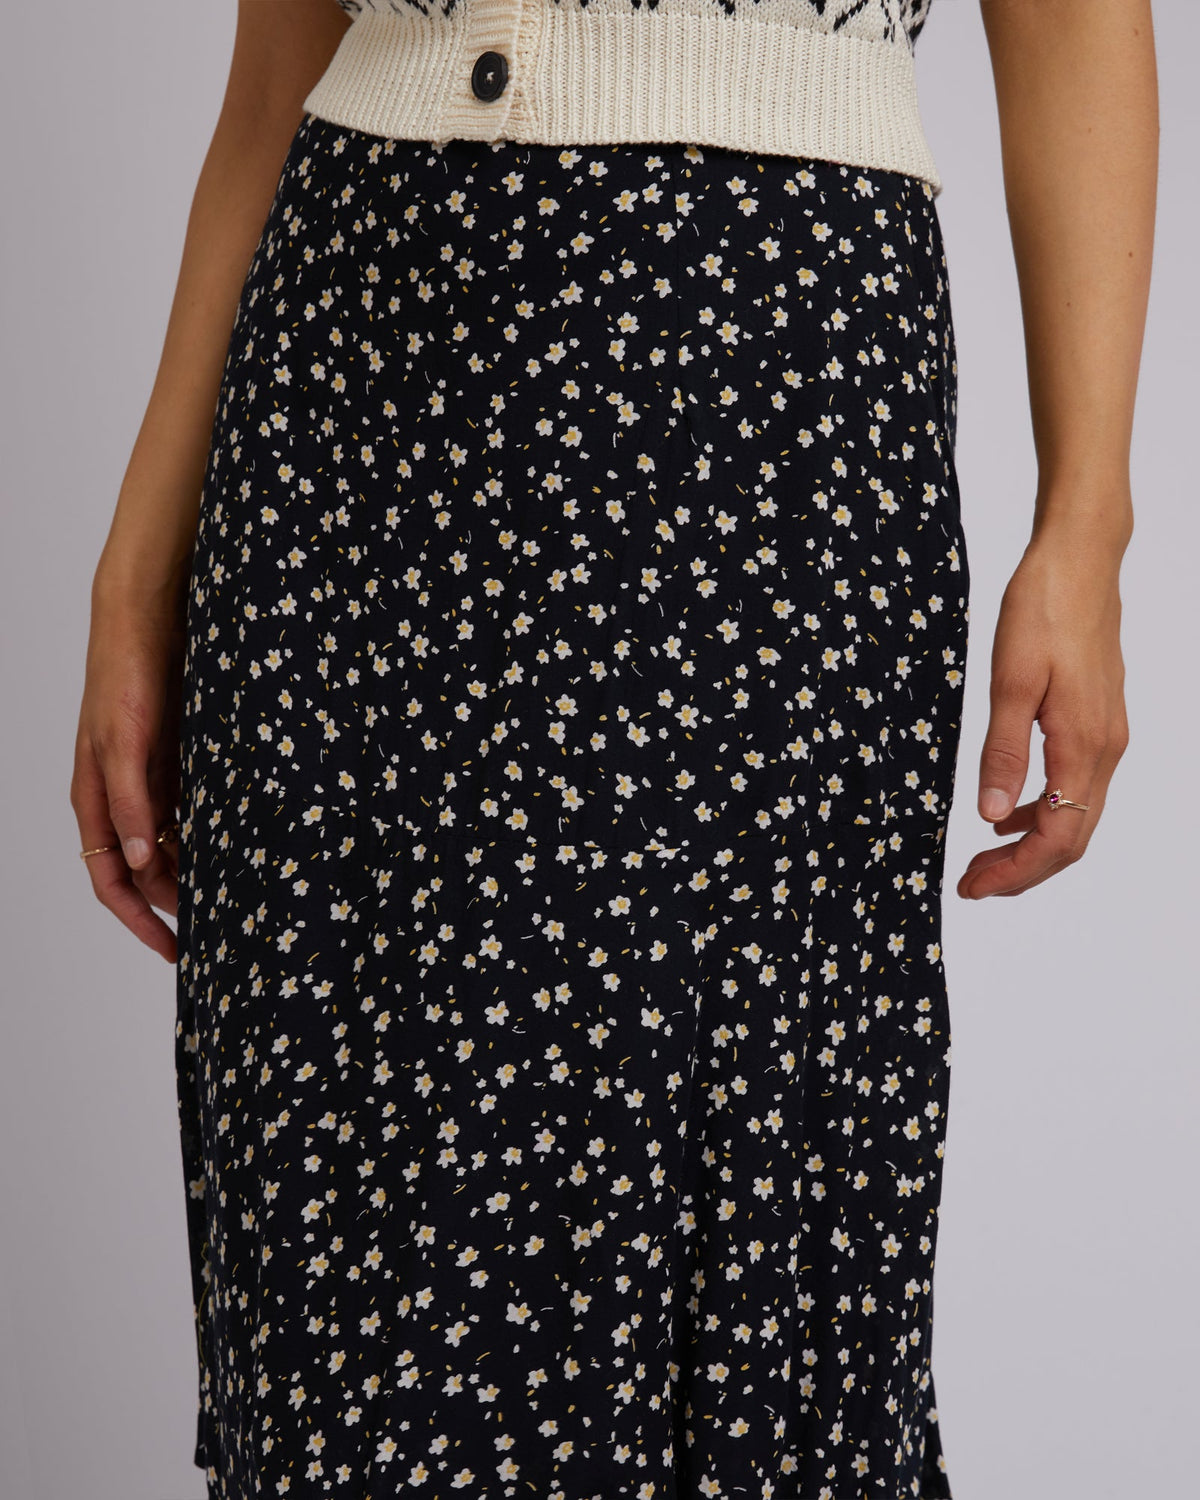 All About Eve-Lily Floral Print Maxi Skirt-Edge Clothing